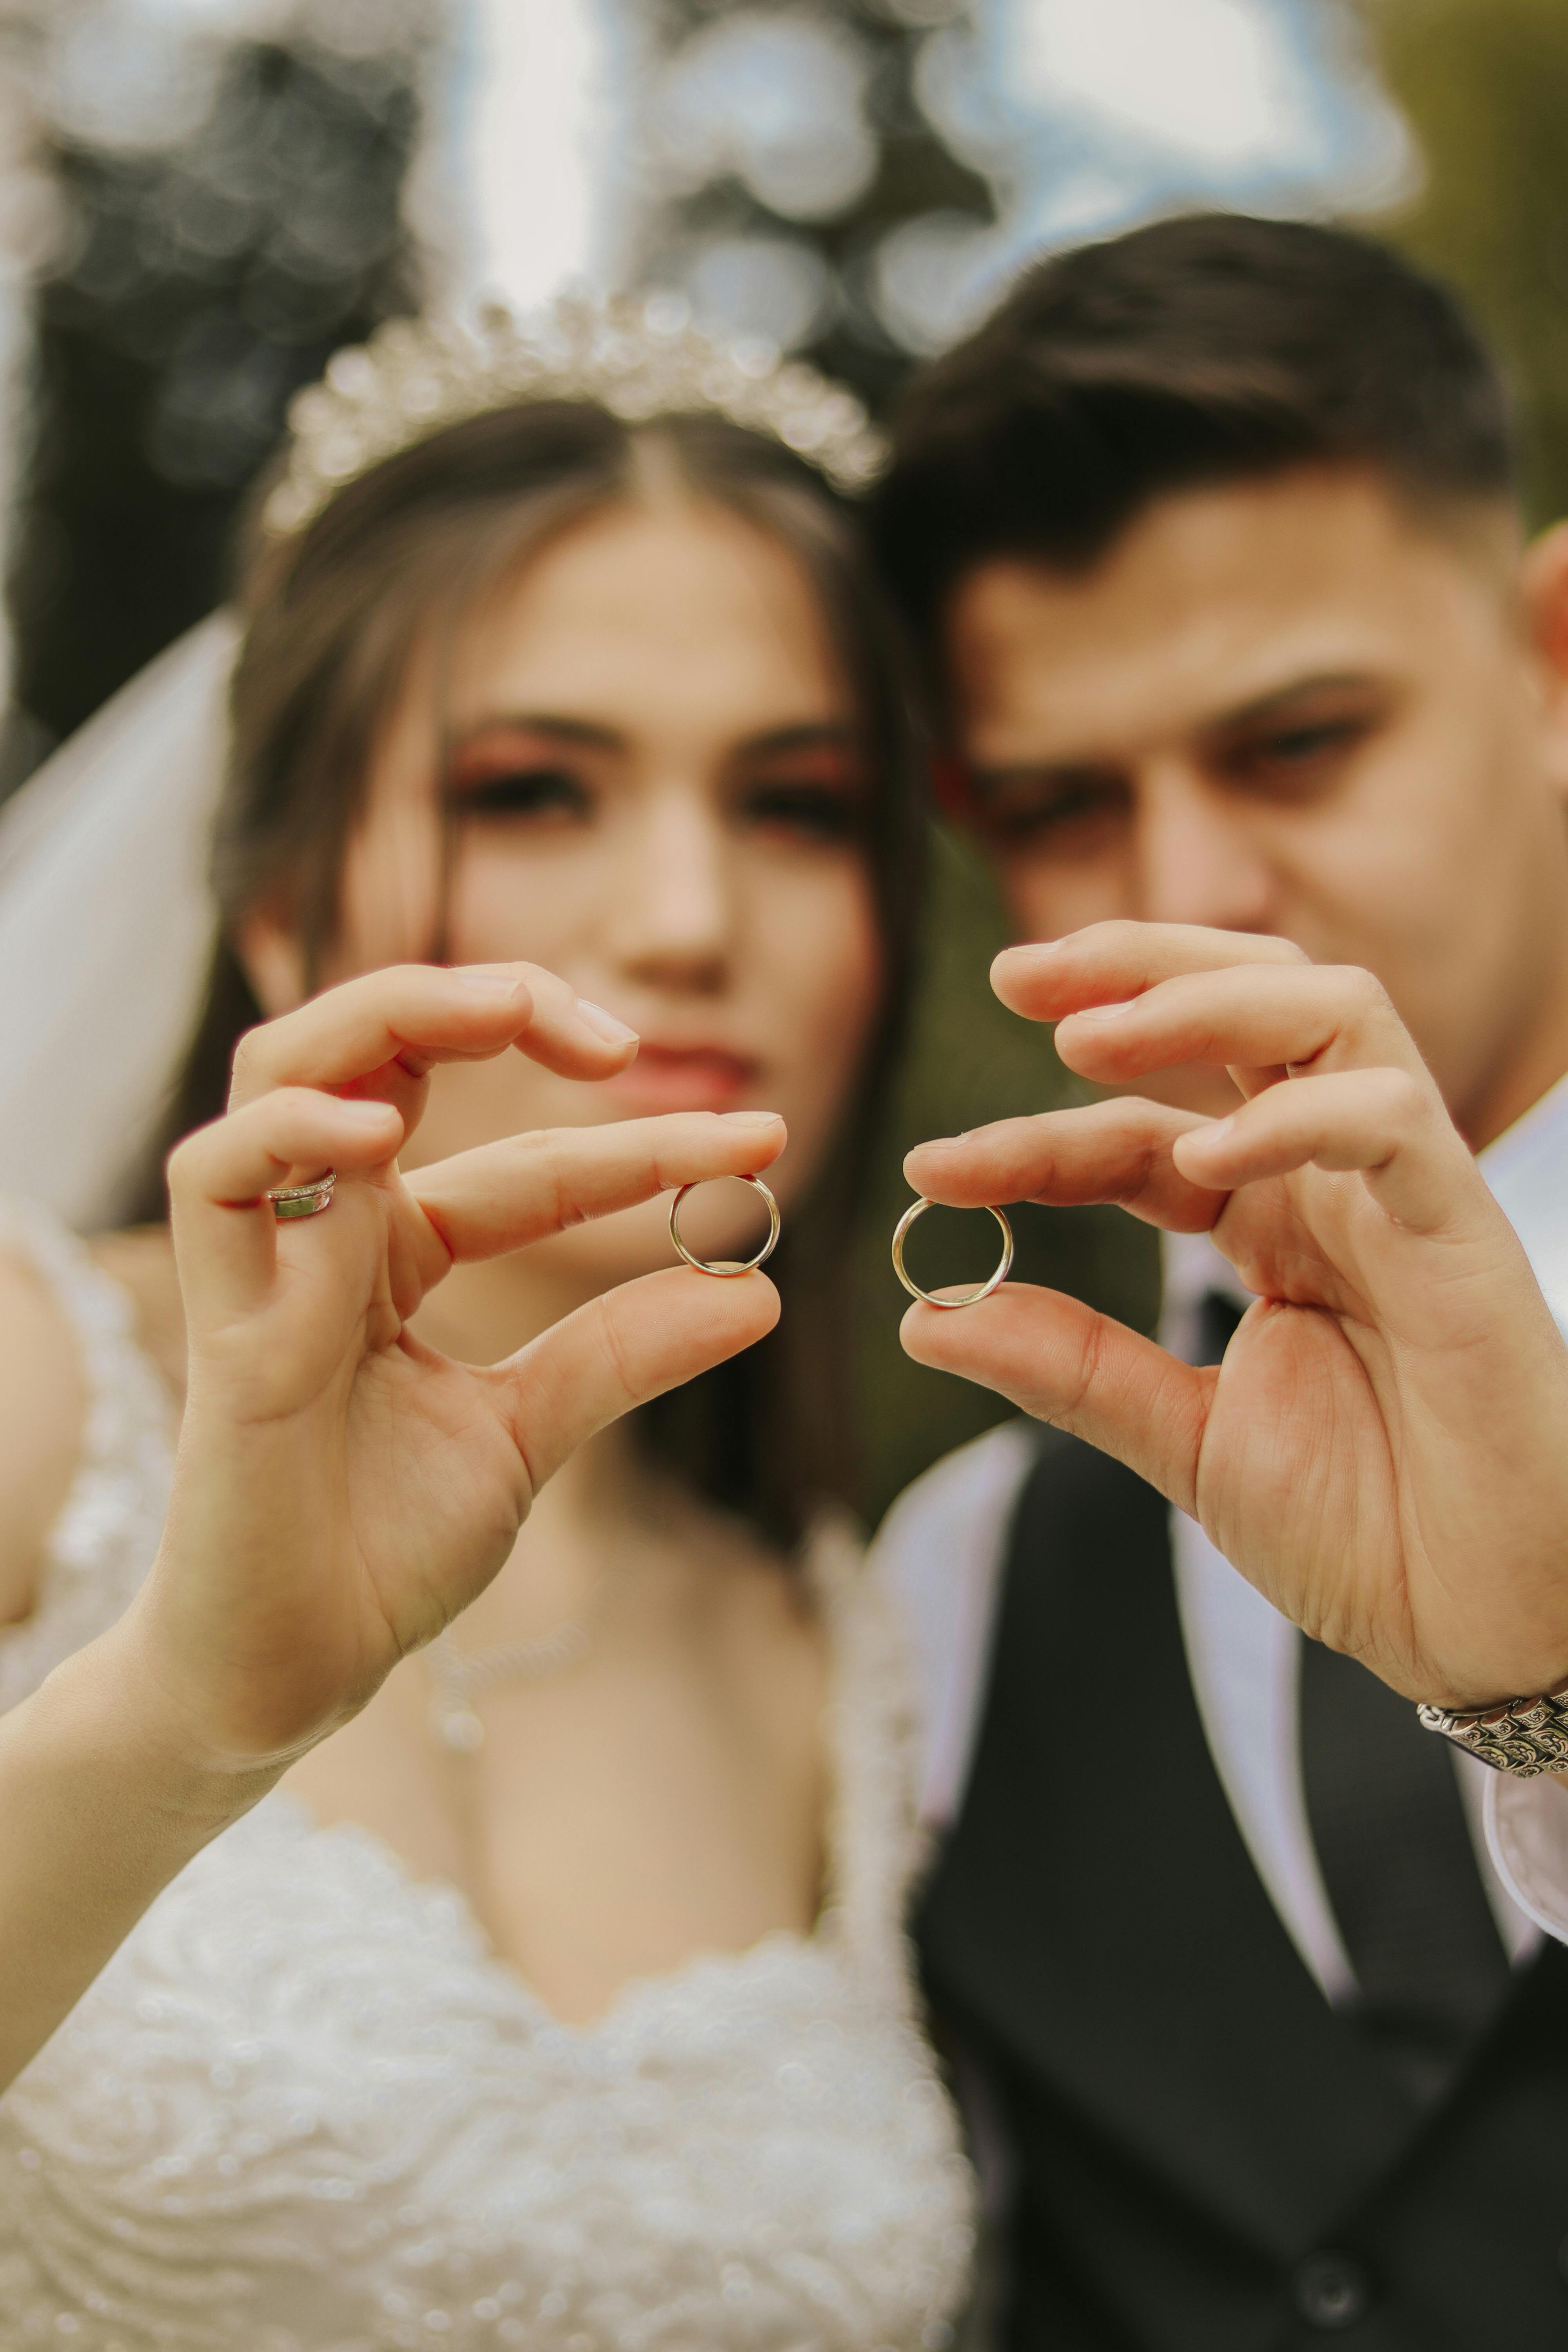 Bridegroom And Bride Kissing And Showing Wedding Rings On Their Fingers  Stock Photo - Download Image Now - iStock